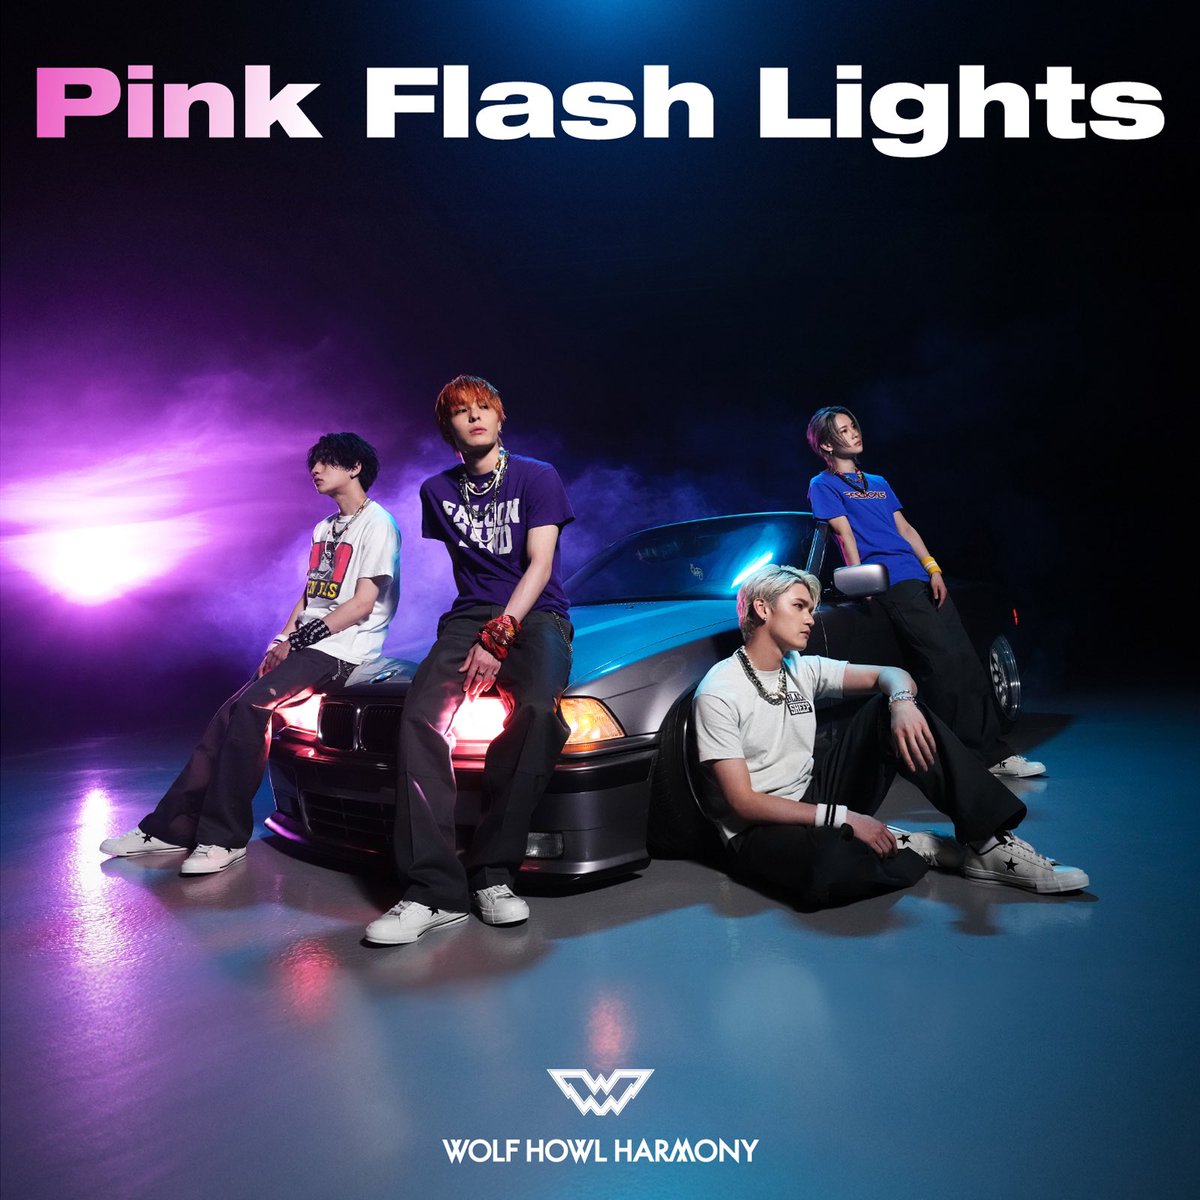 2024.5.13 Release WOLF HOWL HARMONY New Single 'Pink Flash Lights' 🐺🩷⚡️ -Concept Photo- 🎧Pre-Add / Pre-Save avex.ffm.to/whh_pfl #WOLFHOWLHARMONY #WHH #青春WHH #PinkFlashLights